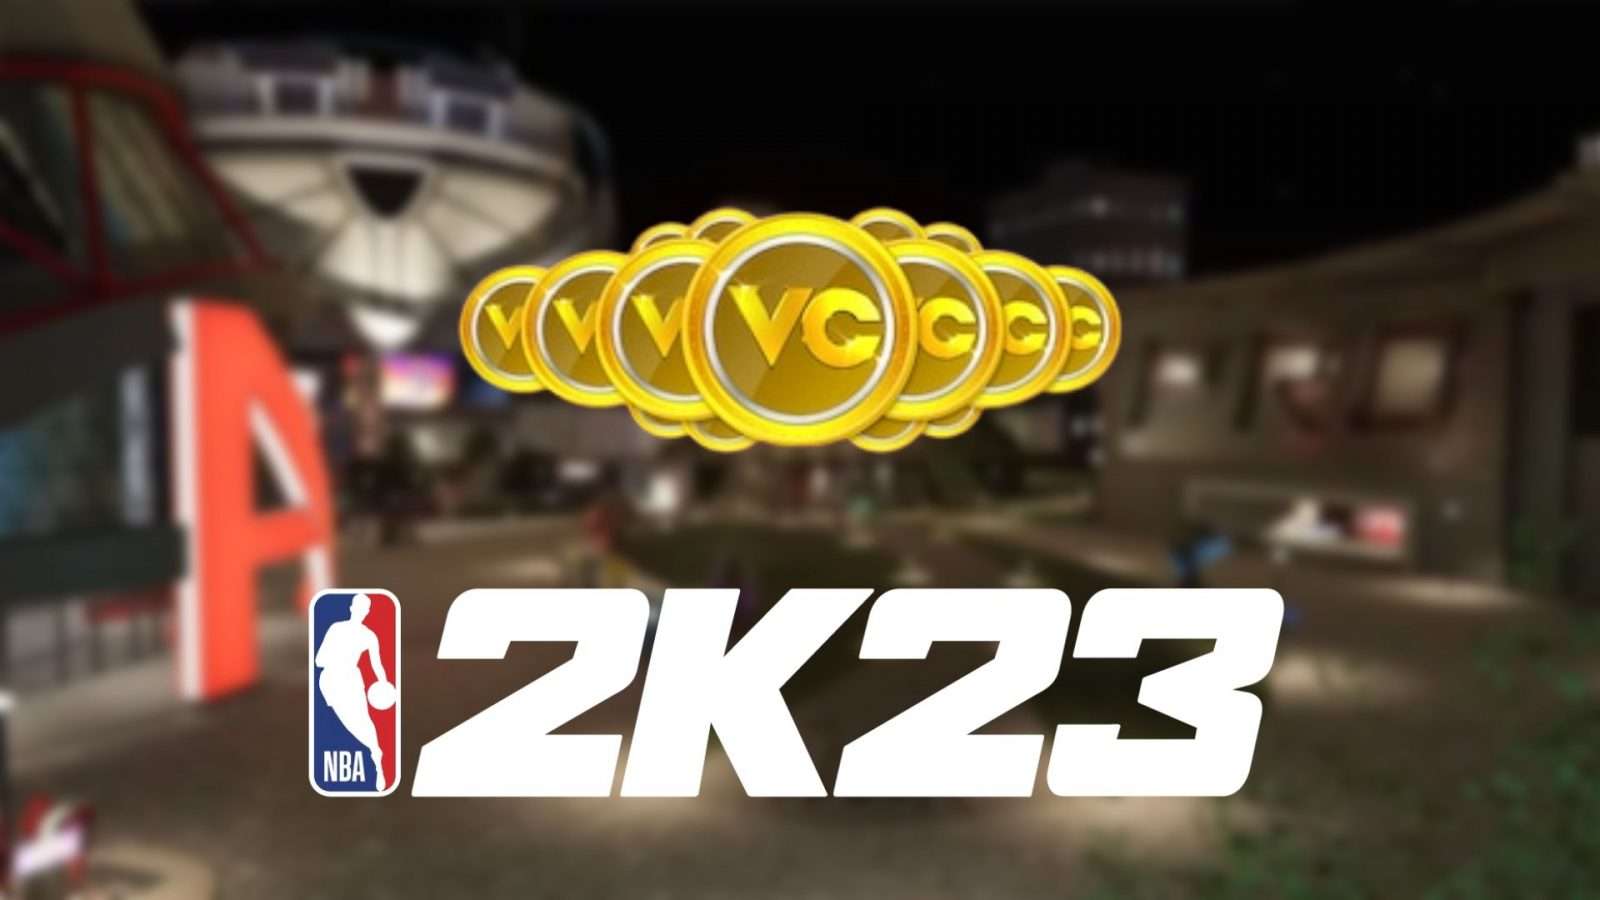 vc currency in nba 2k23